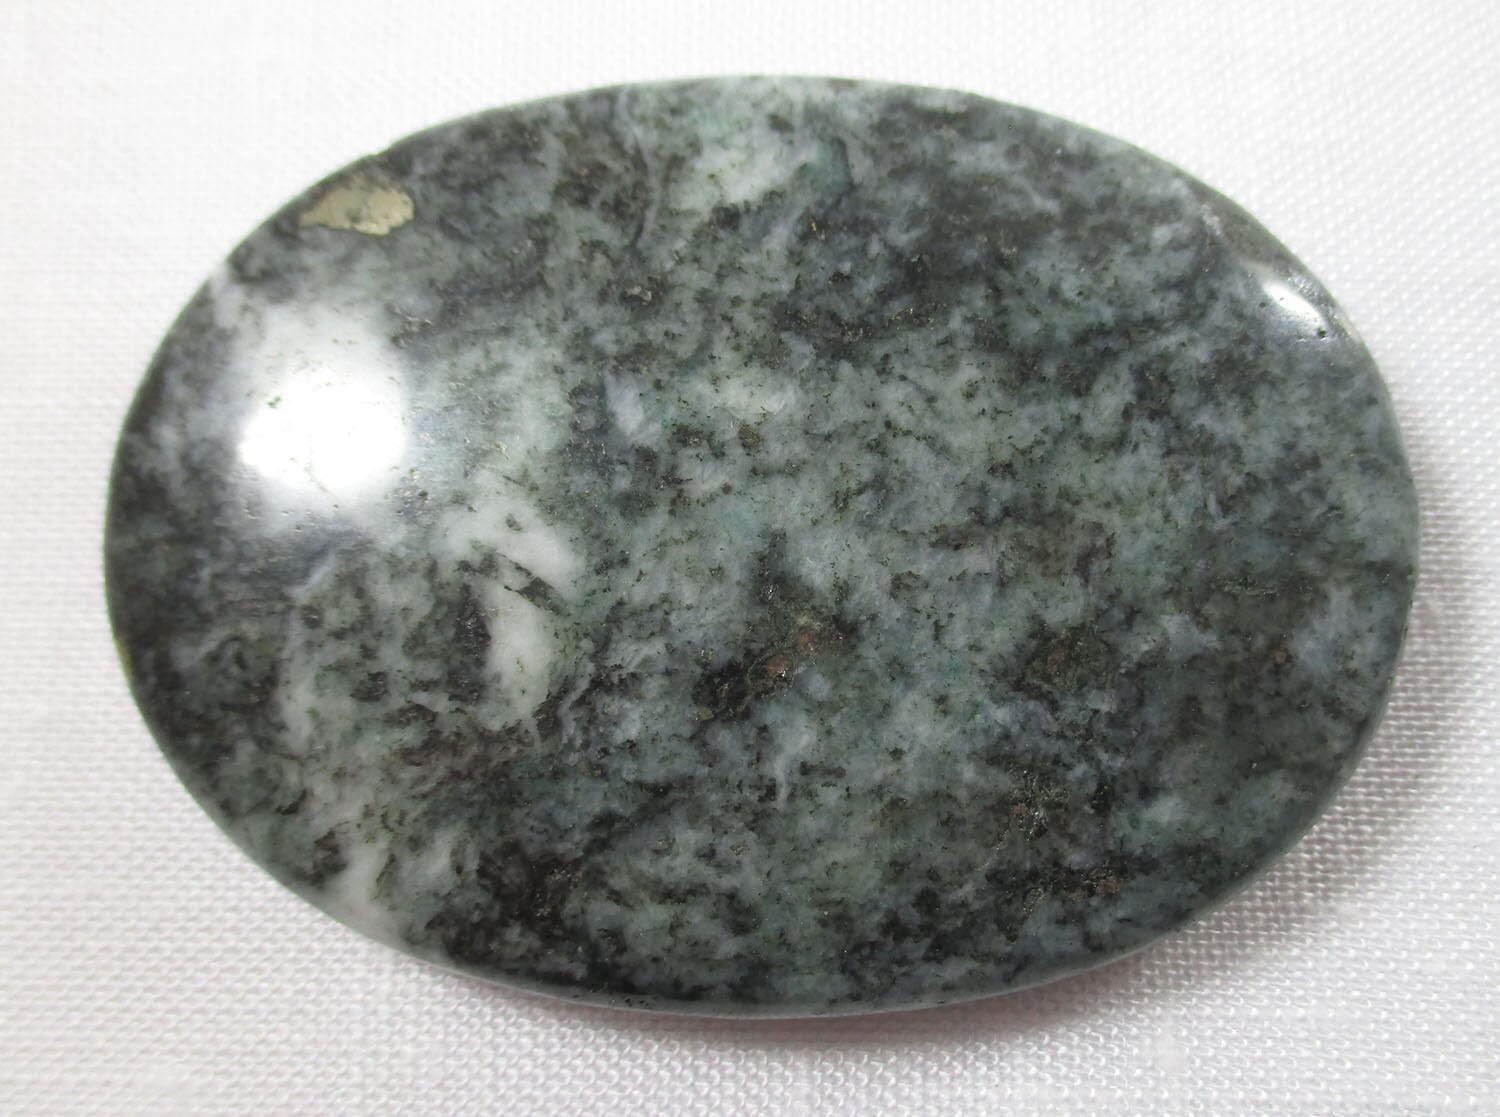 African Jade Palm Stone - Cut & Polished Crystals > Polished Crystal Palm Stones